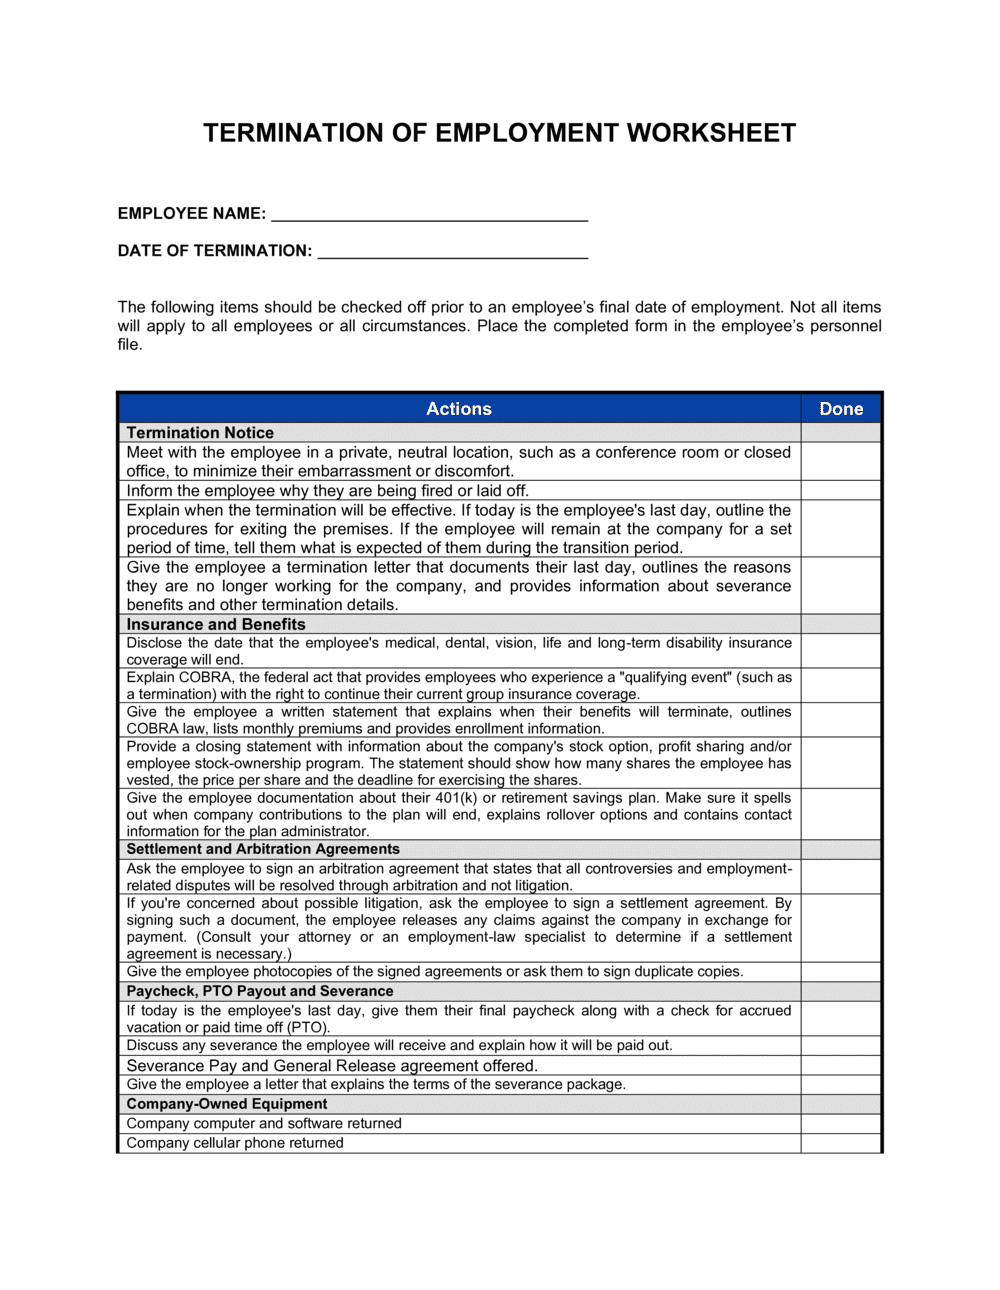 Business-in-a-Box's Worksheet Termination of Employment Template